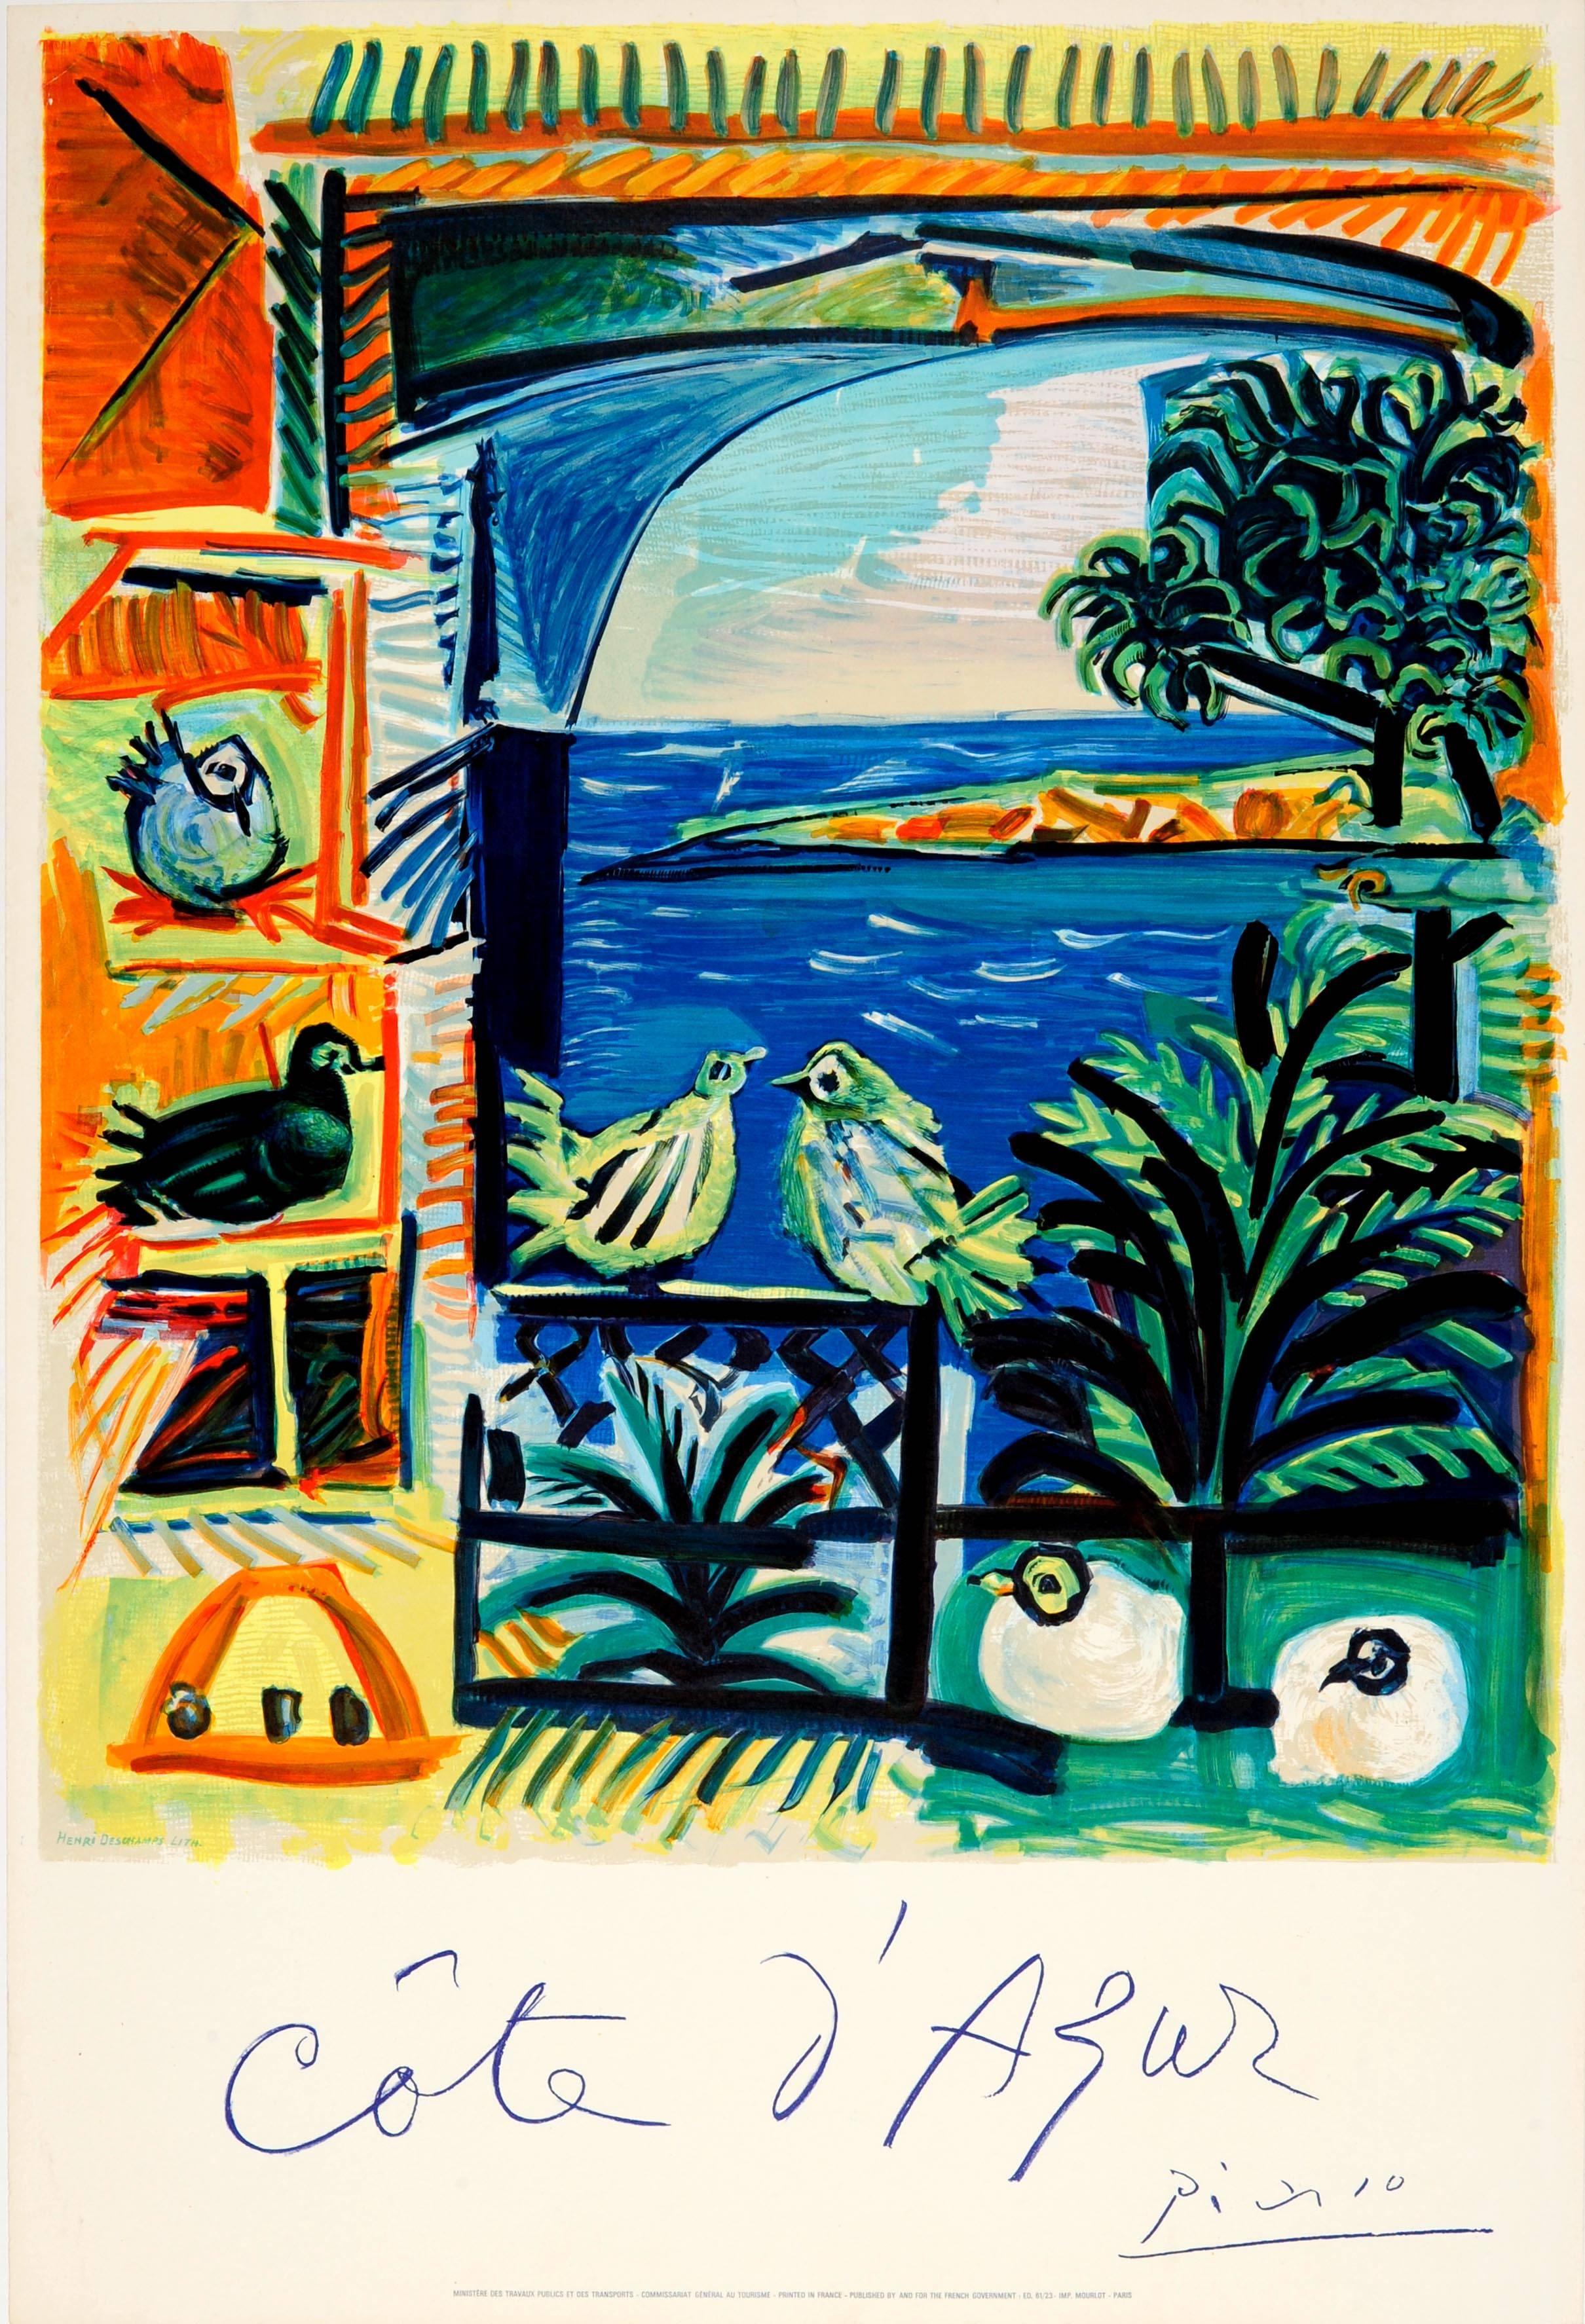 Original vintage travel poster advertising the Cote d'Azur - the French Riviera - by the notable Spanish artist and sculptor, Pablo Picasso (1881-1973). Colourful painting of a view of the Mediterranean sea viewed from the terrace of a seaside house